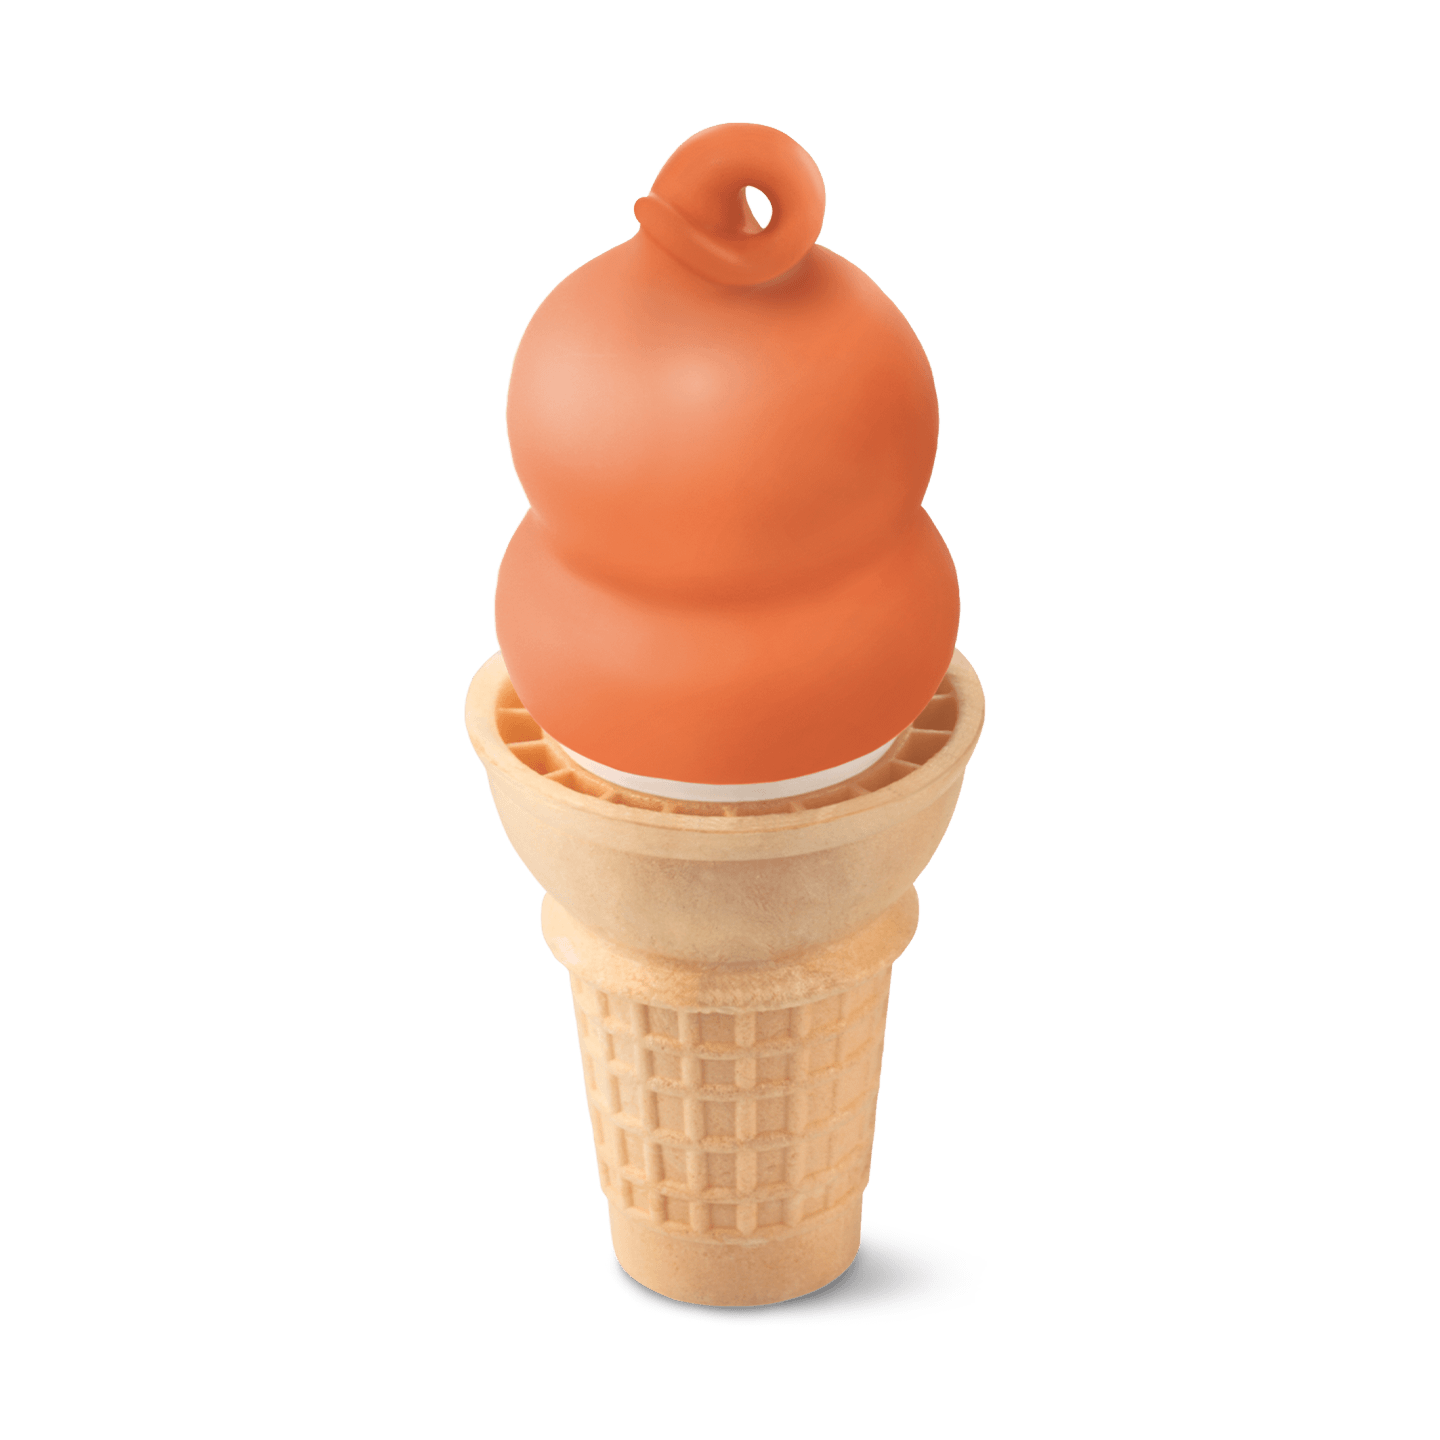 Dairy Queen Kids Dreamsicle Dipped Ice Cream Cone Nutrition Facts